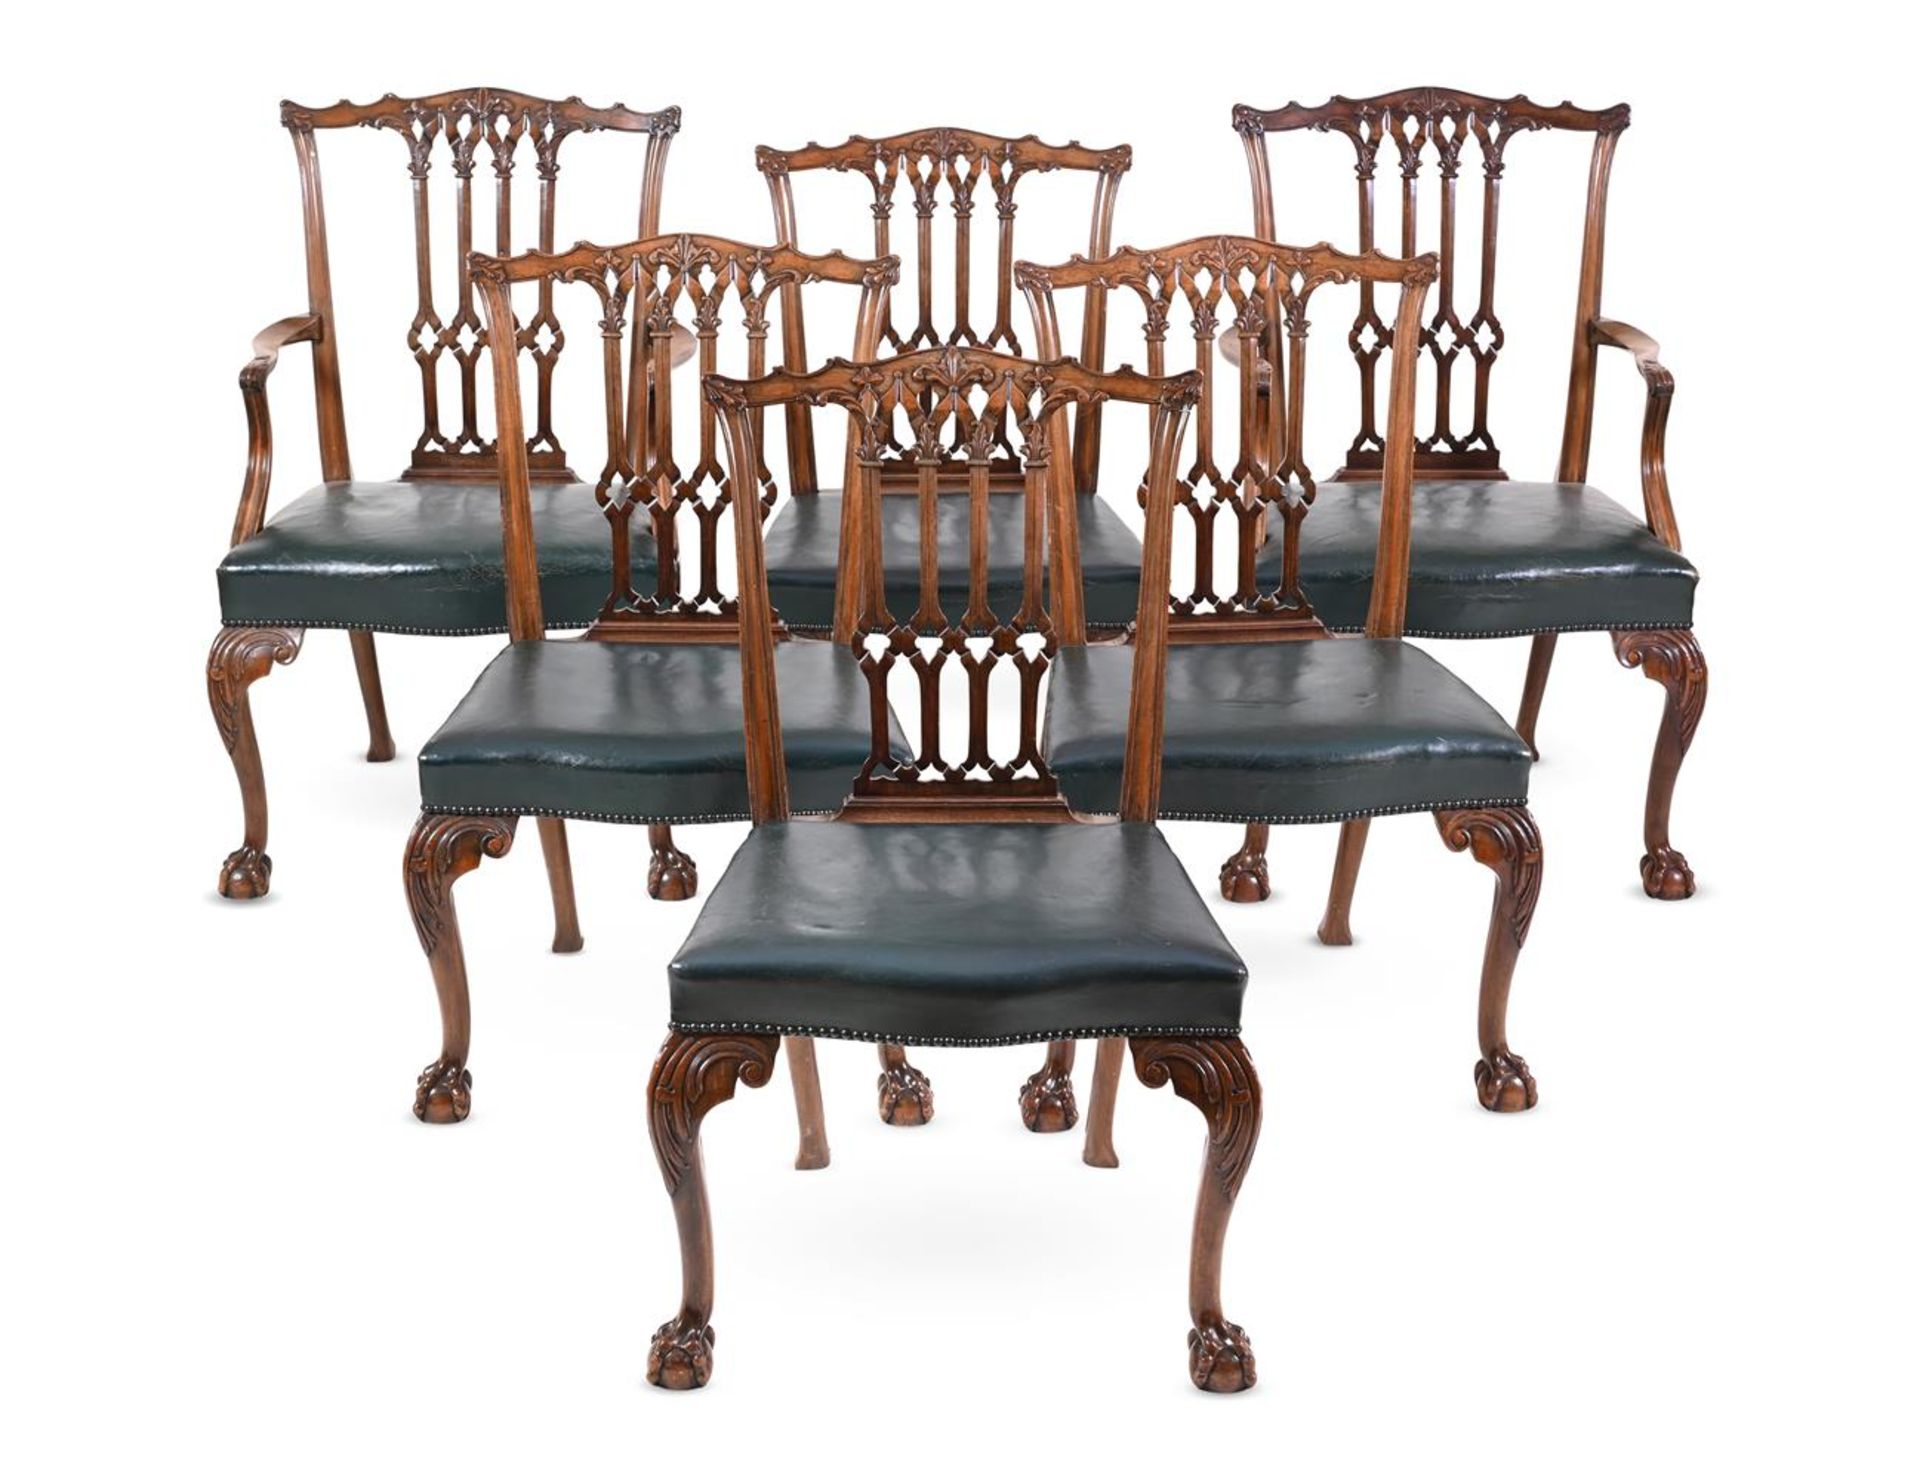 A SET OF SIX MAHOGANY AND LEATHER UPHOLSTERED DINING CHAIRS IN GEORGE III STYLE